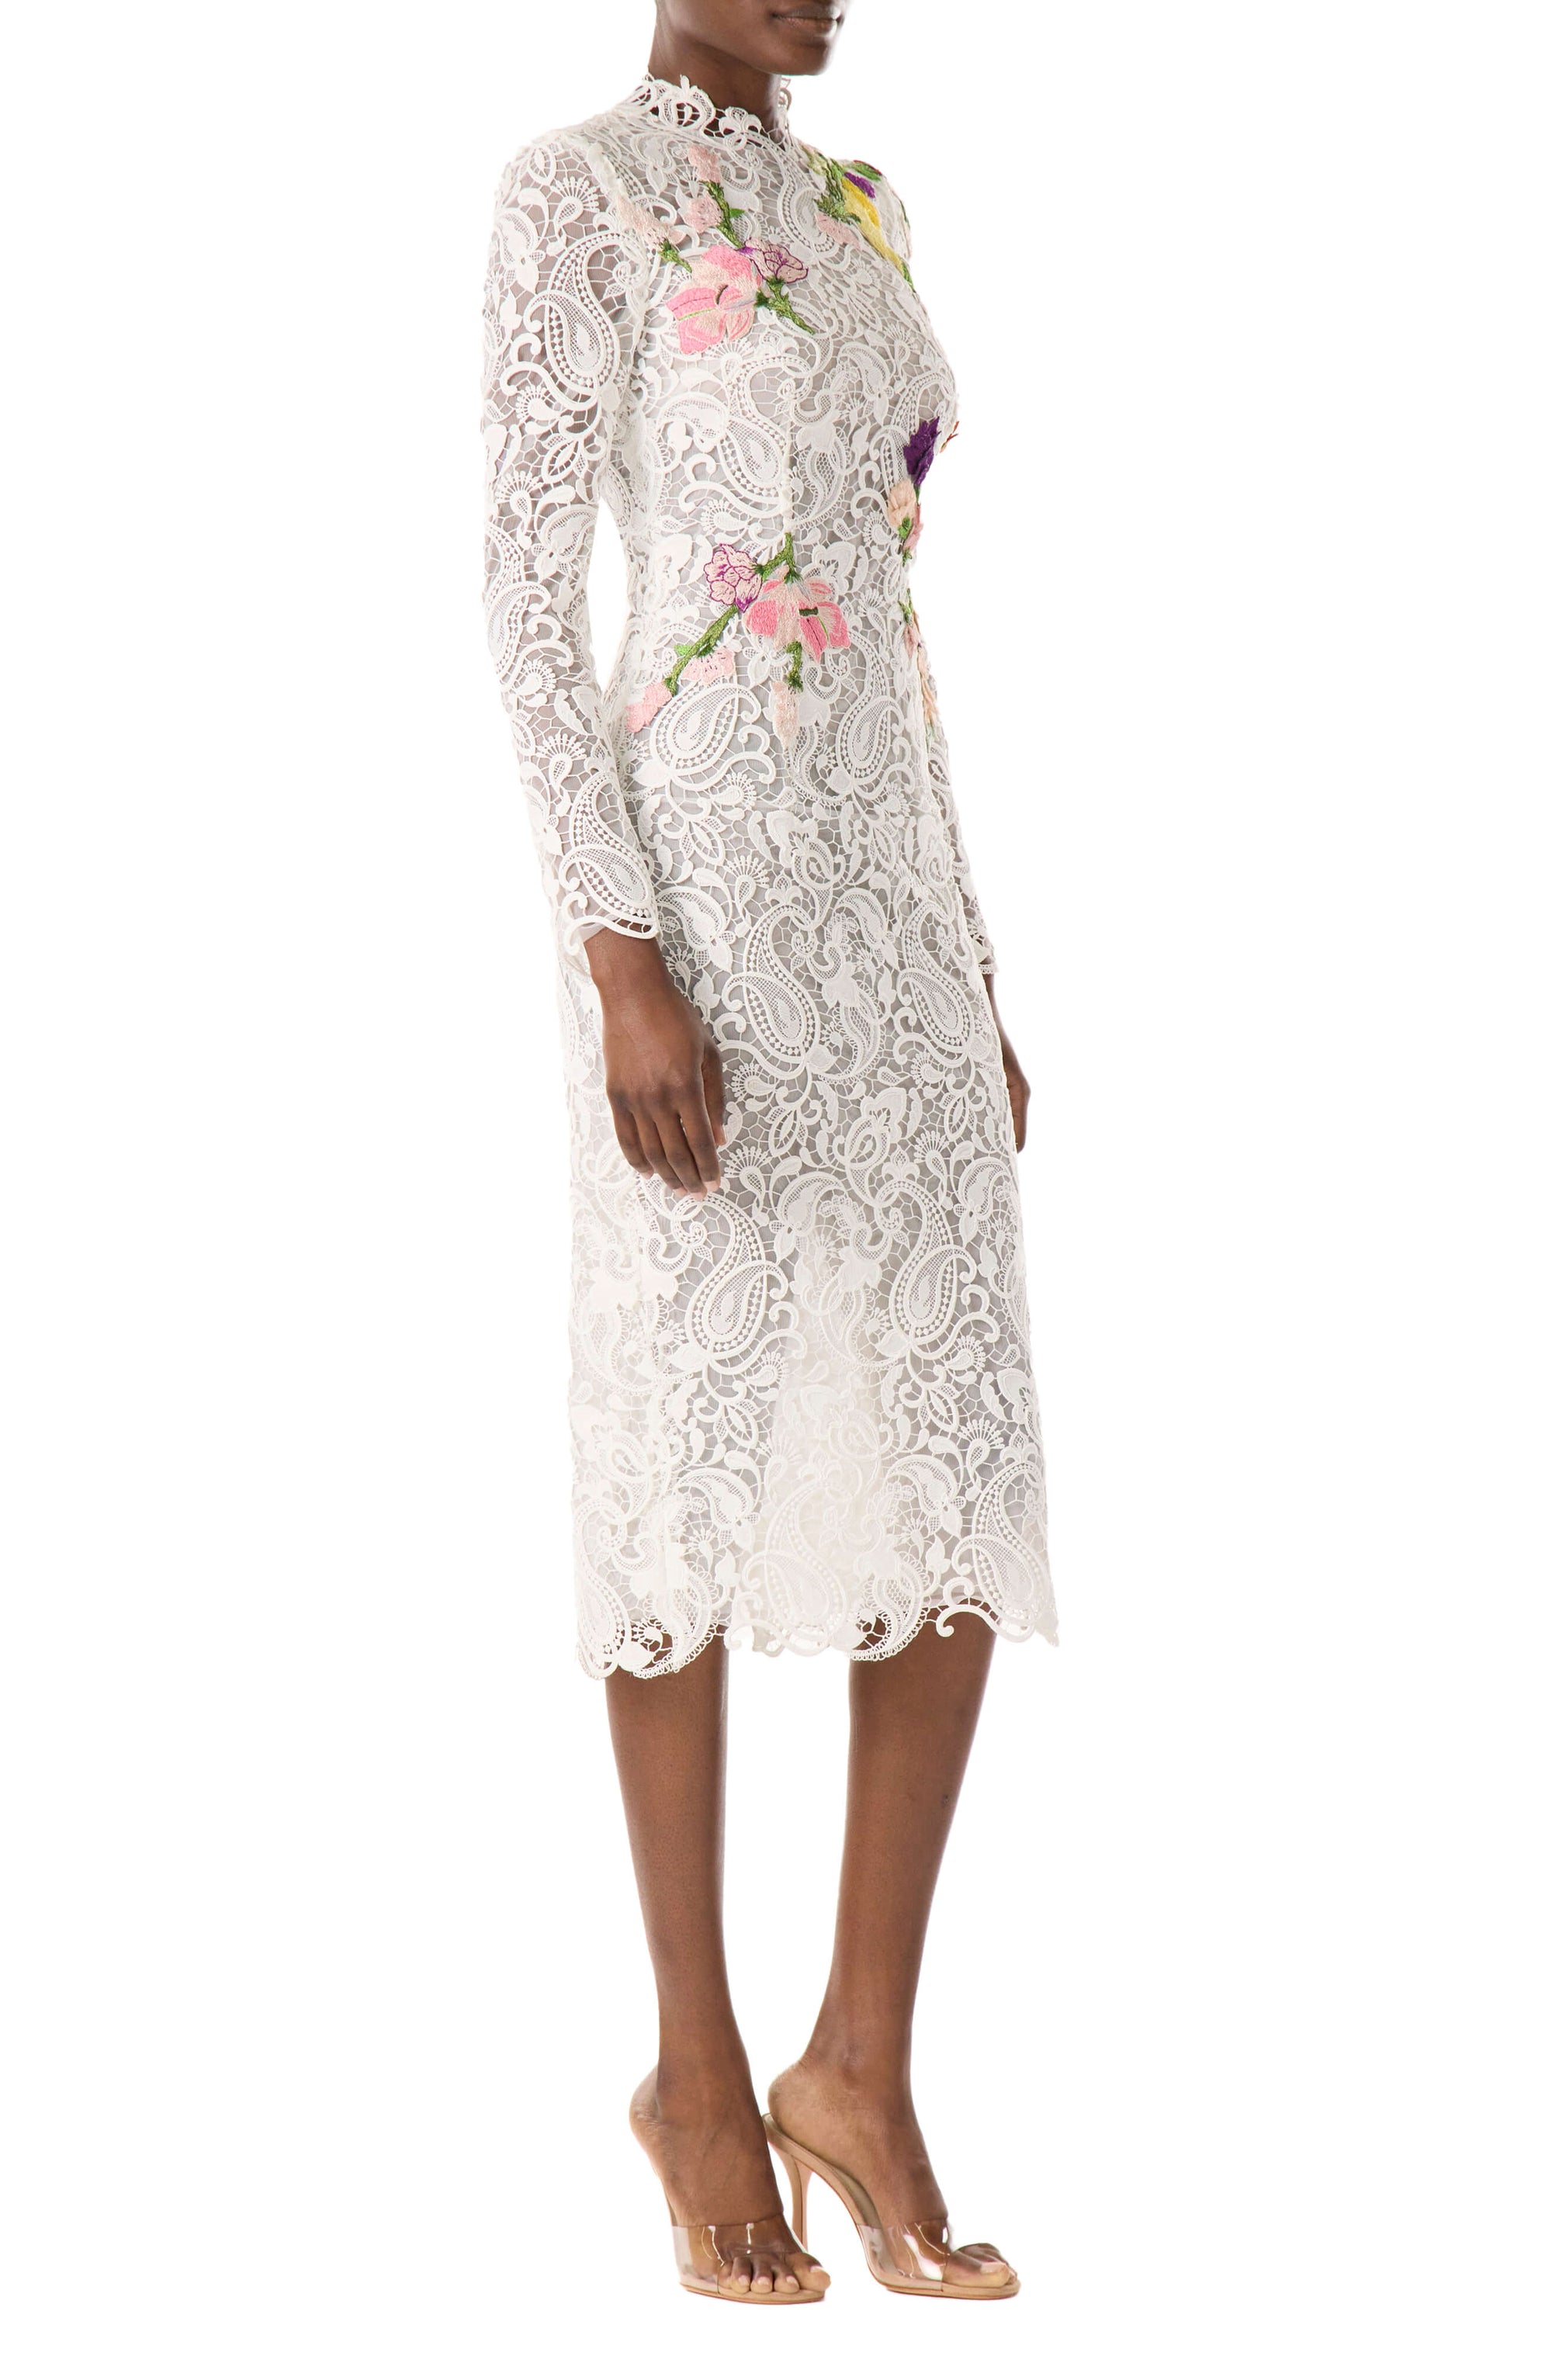 Monique Lhuillier midi length, long sleeve white lace dress with floral embroidery.